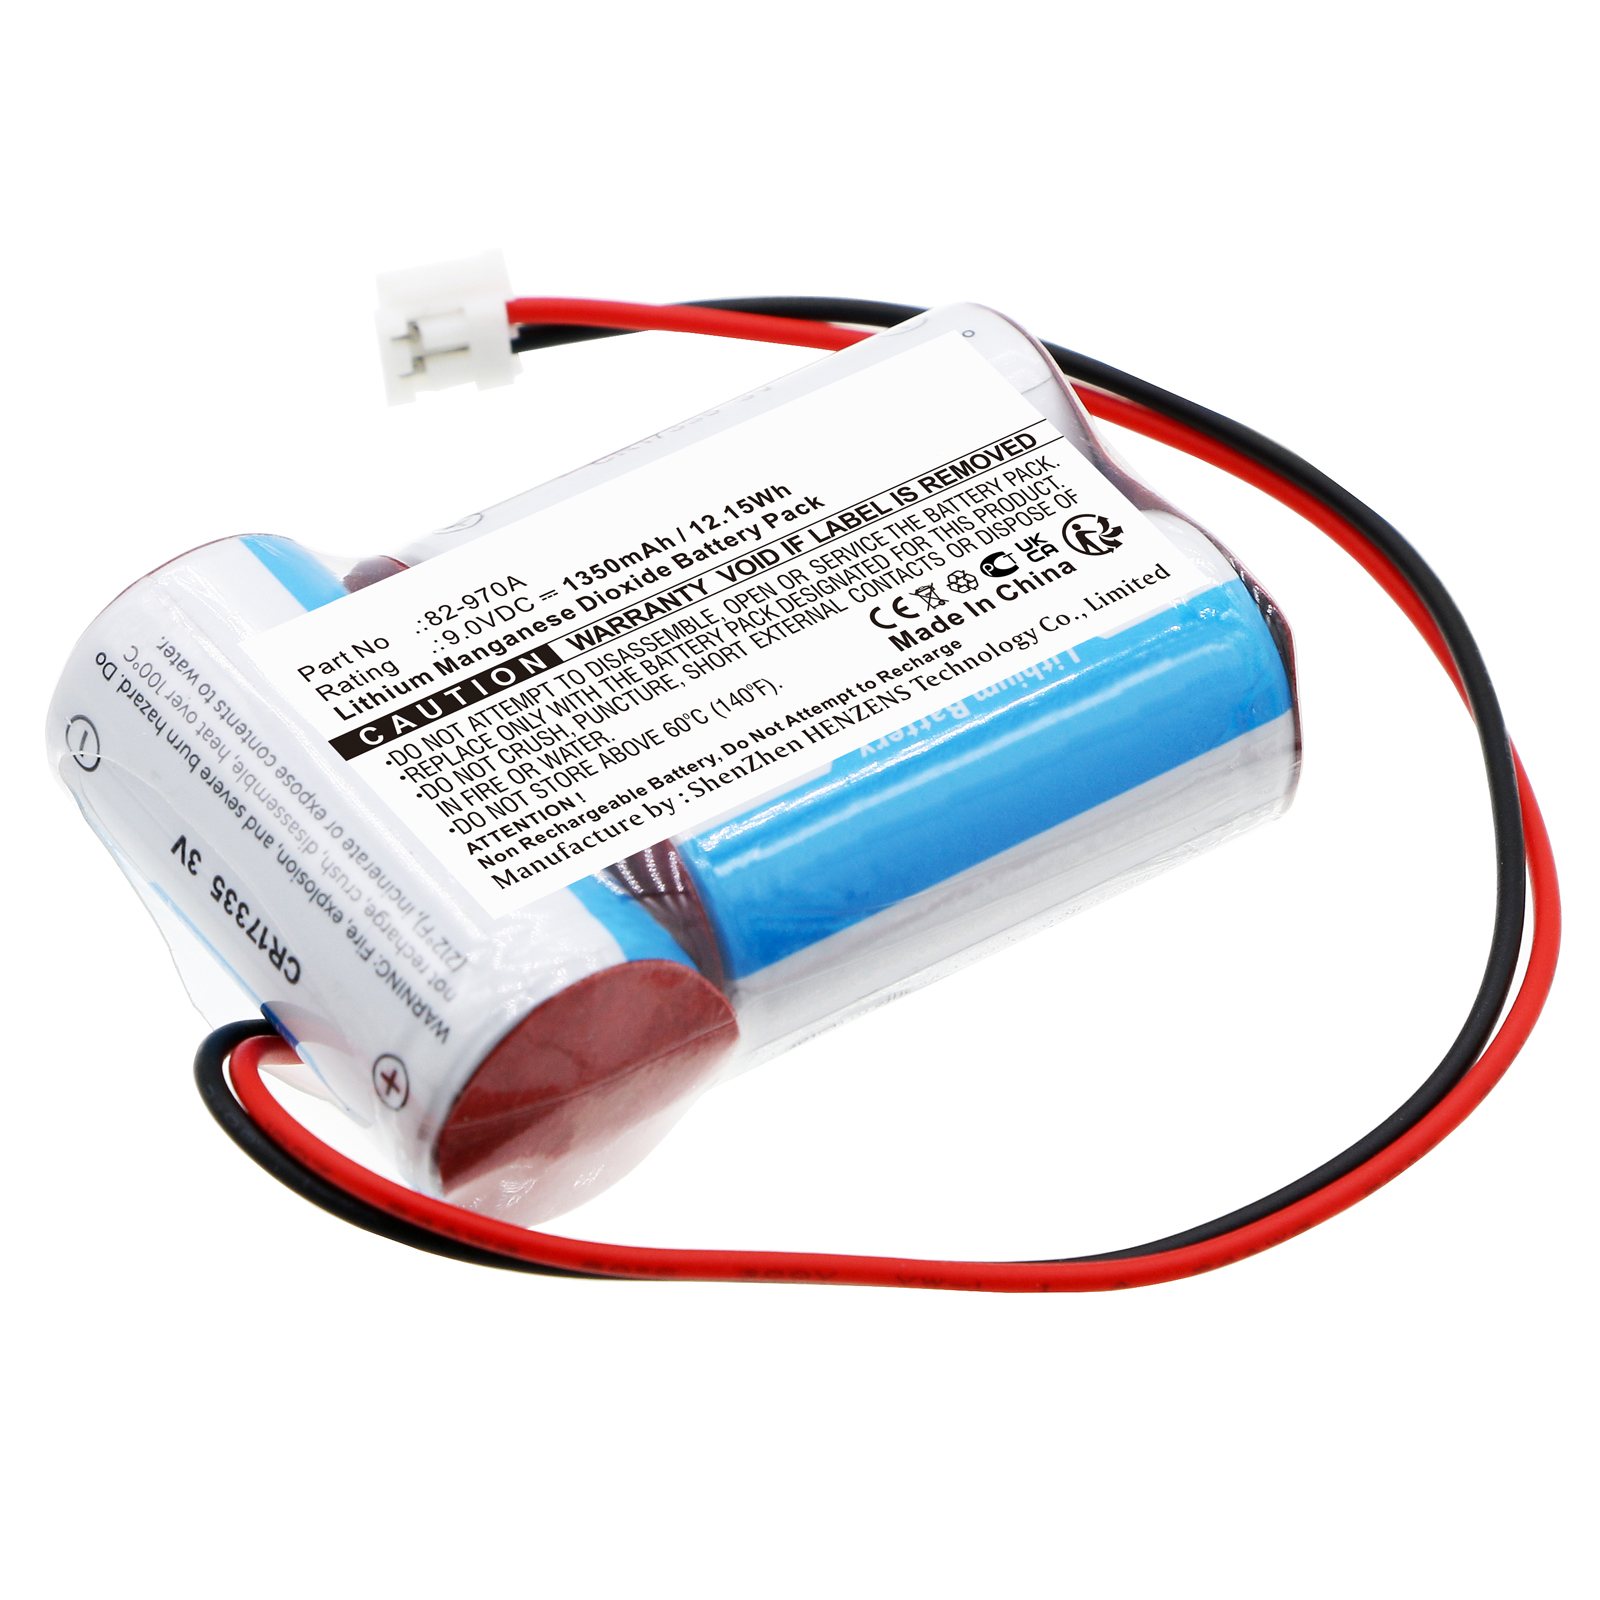 Batteries for SailorMarine Safety & Flotation Devices